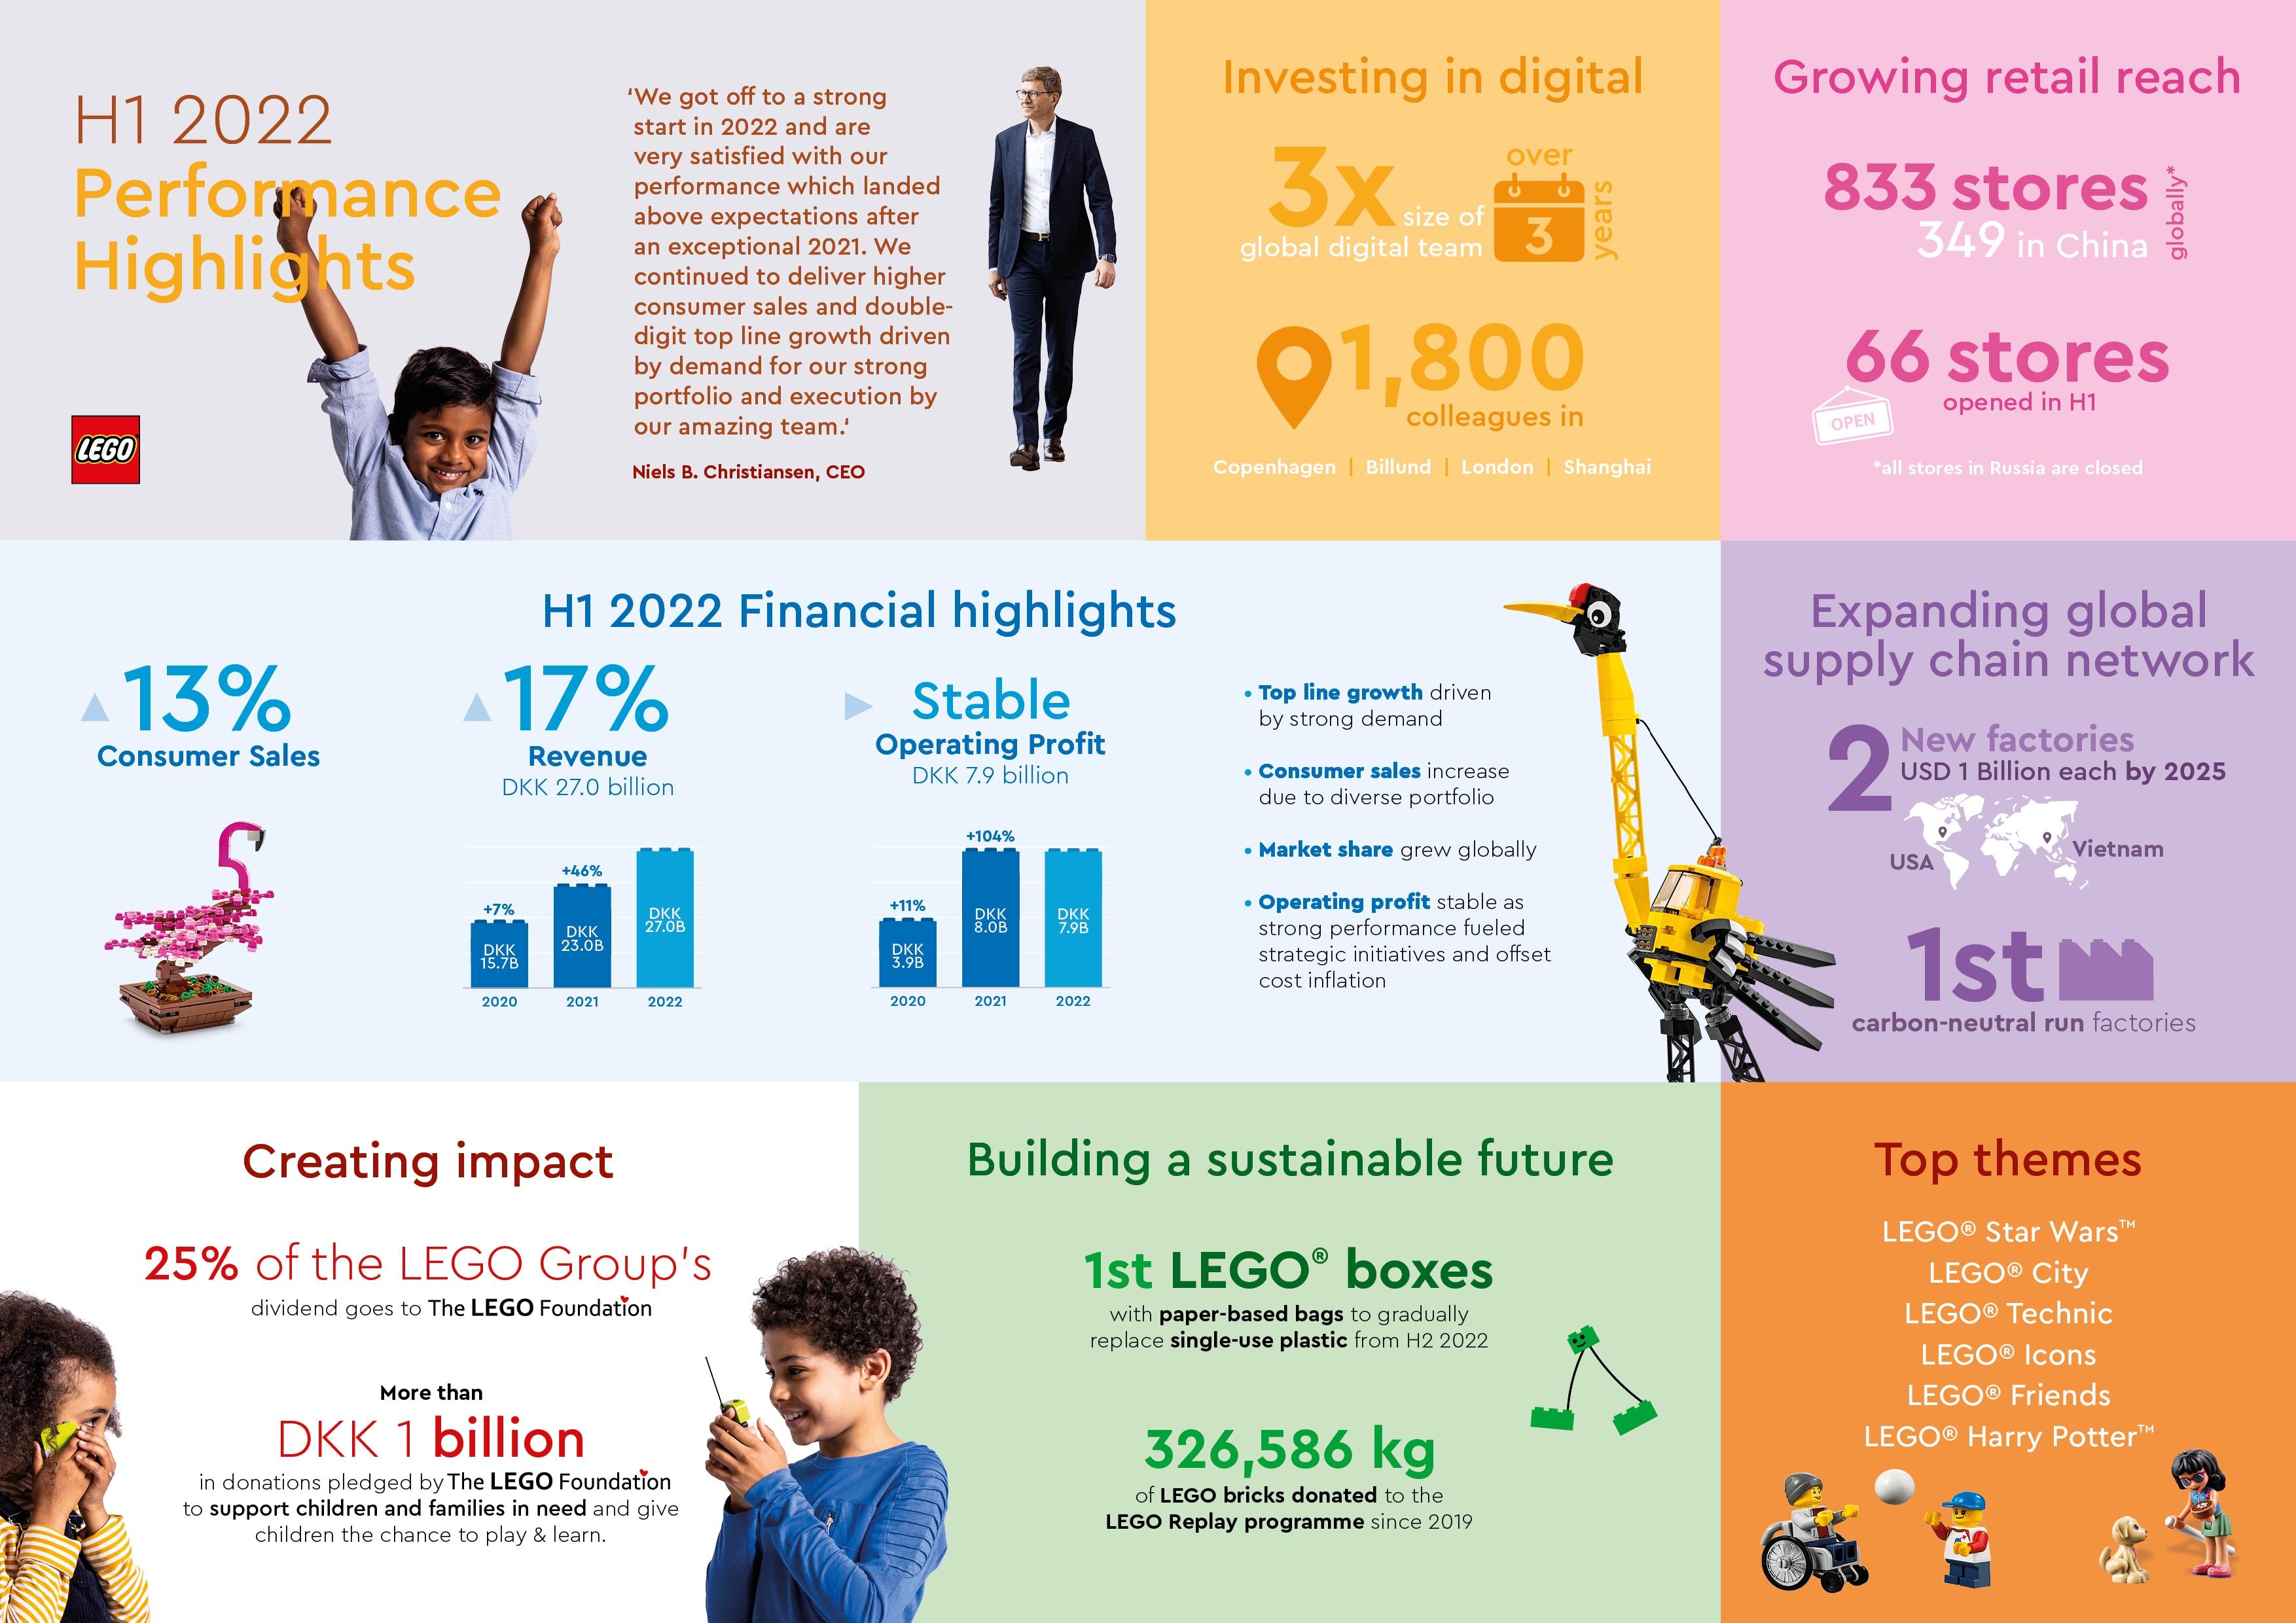 stimulere farligt Alabama The LEGO Group delivers top line growth in H1 2022 while accelerating  strategic growth initiatives - About Us - LEGO.com